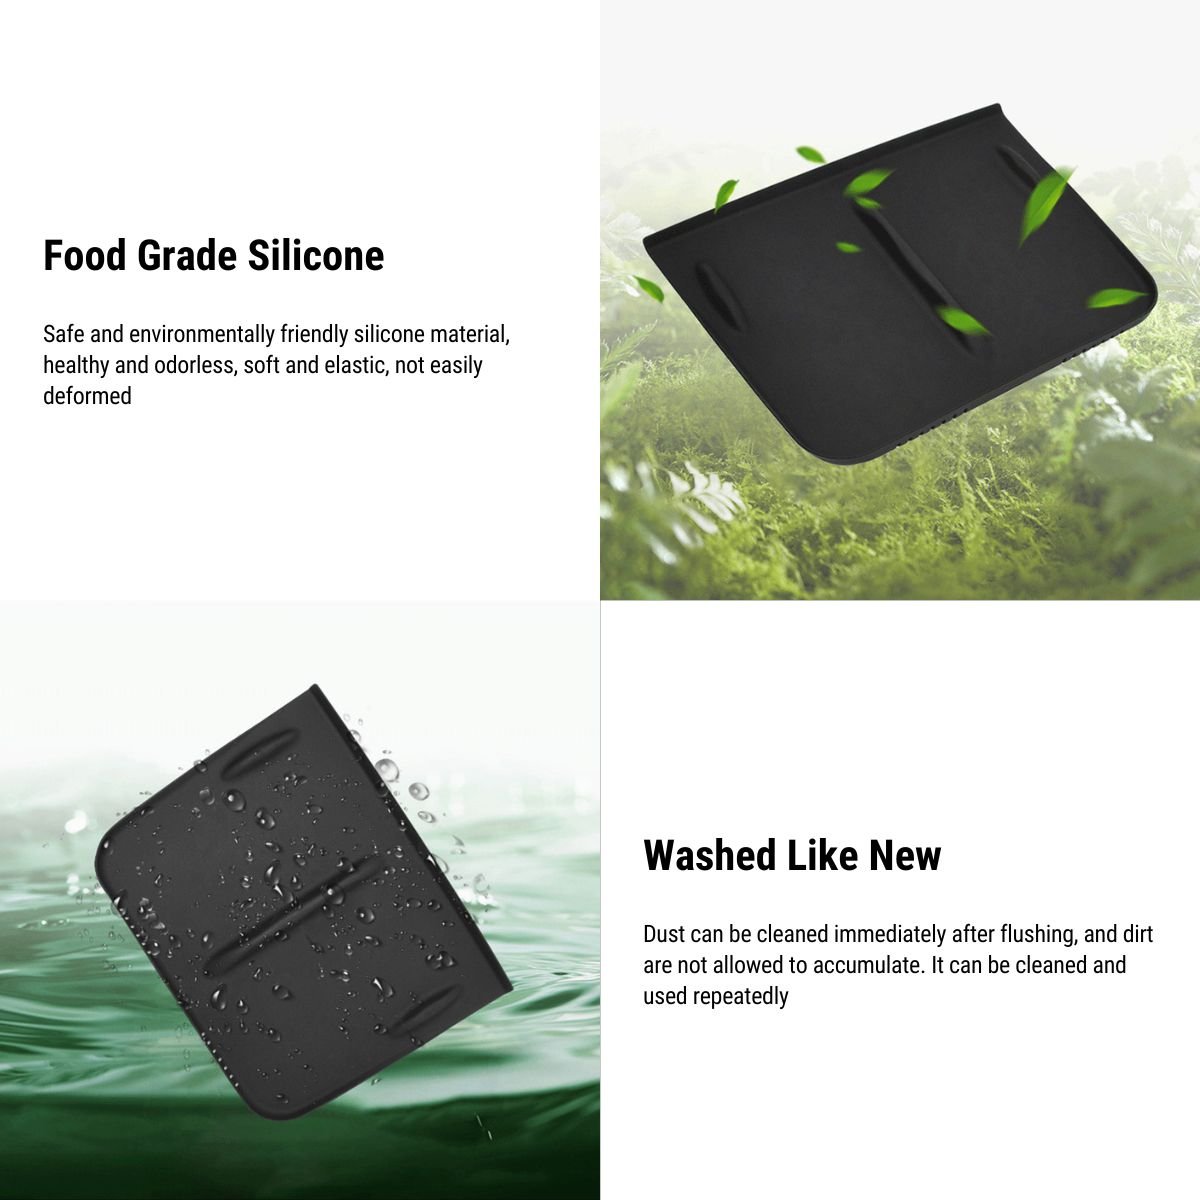 Wireless Charging Pad Anti-Slip Protective Mat for Tesla Model 3 / Y 2020-2023 - Tesery Official Store